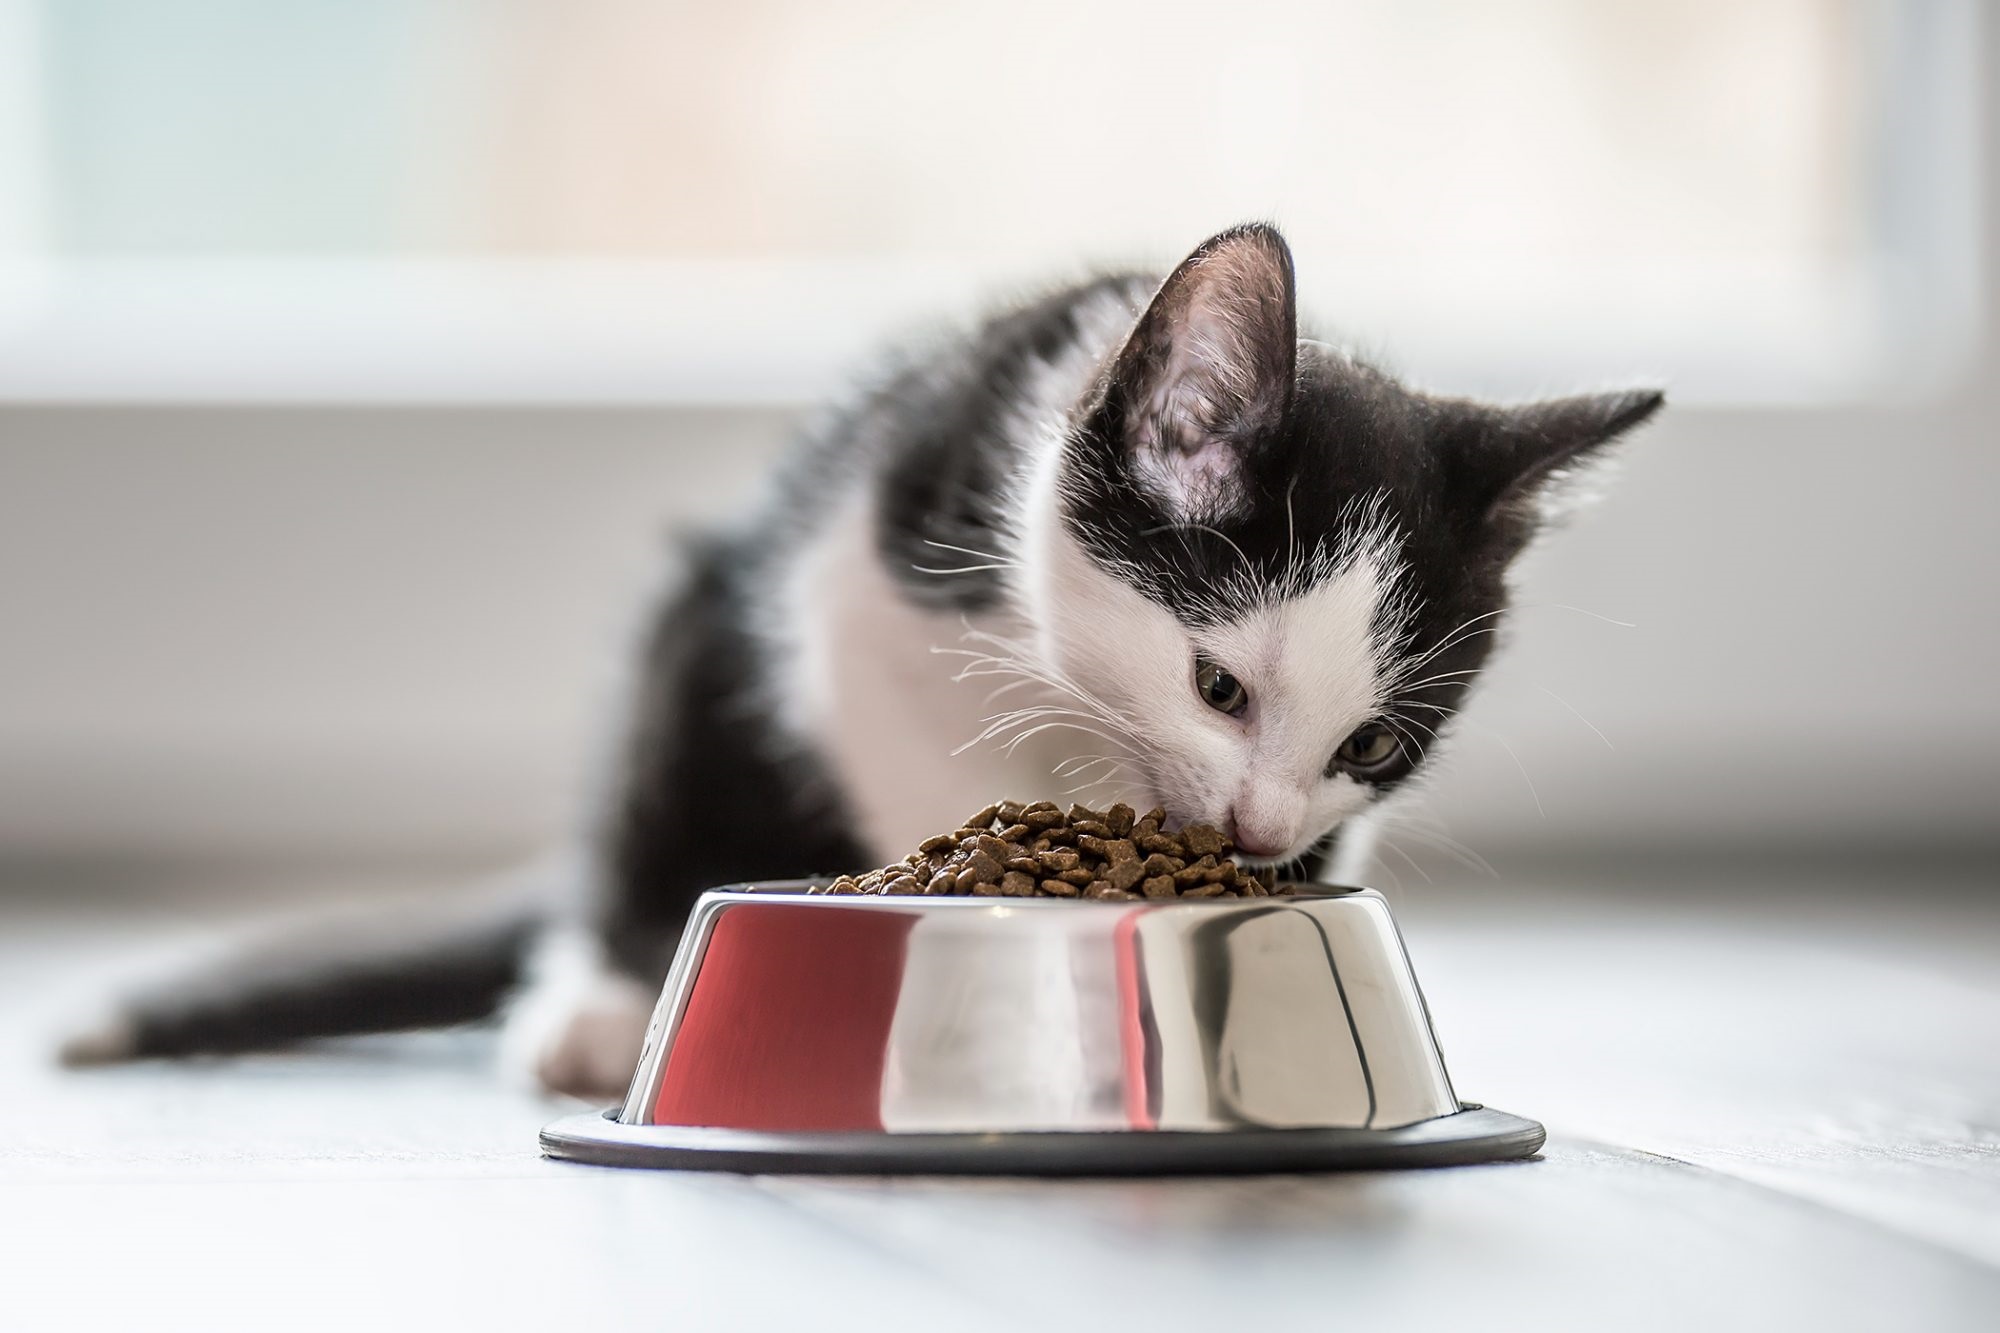 Kitten eating food from a stainless steel bowl